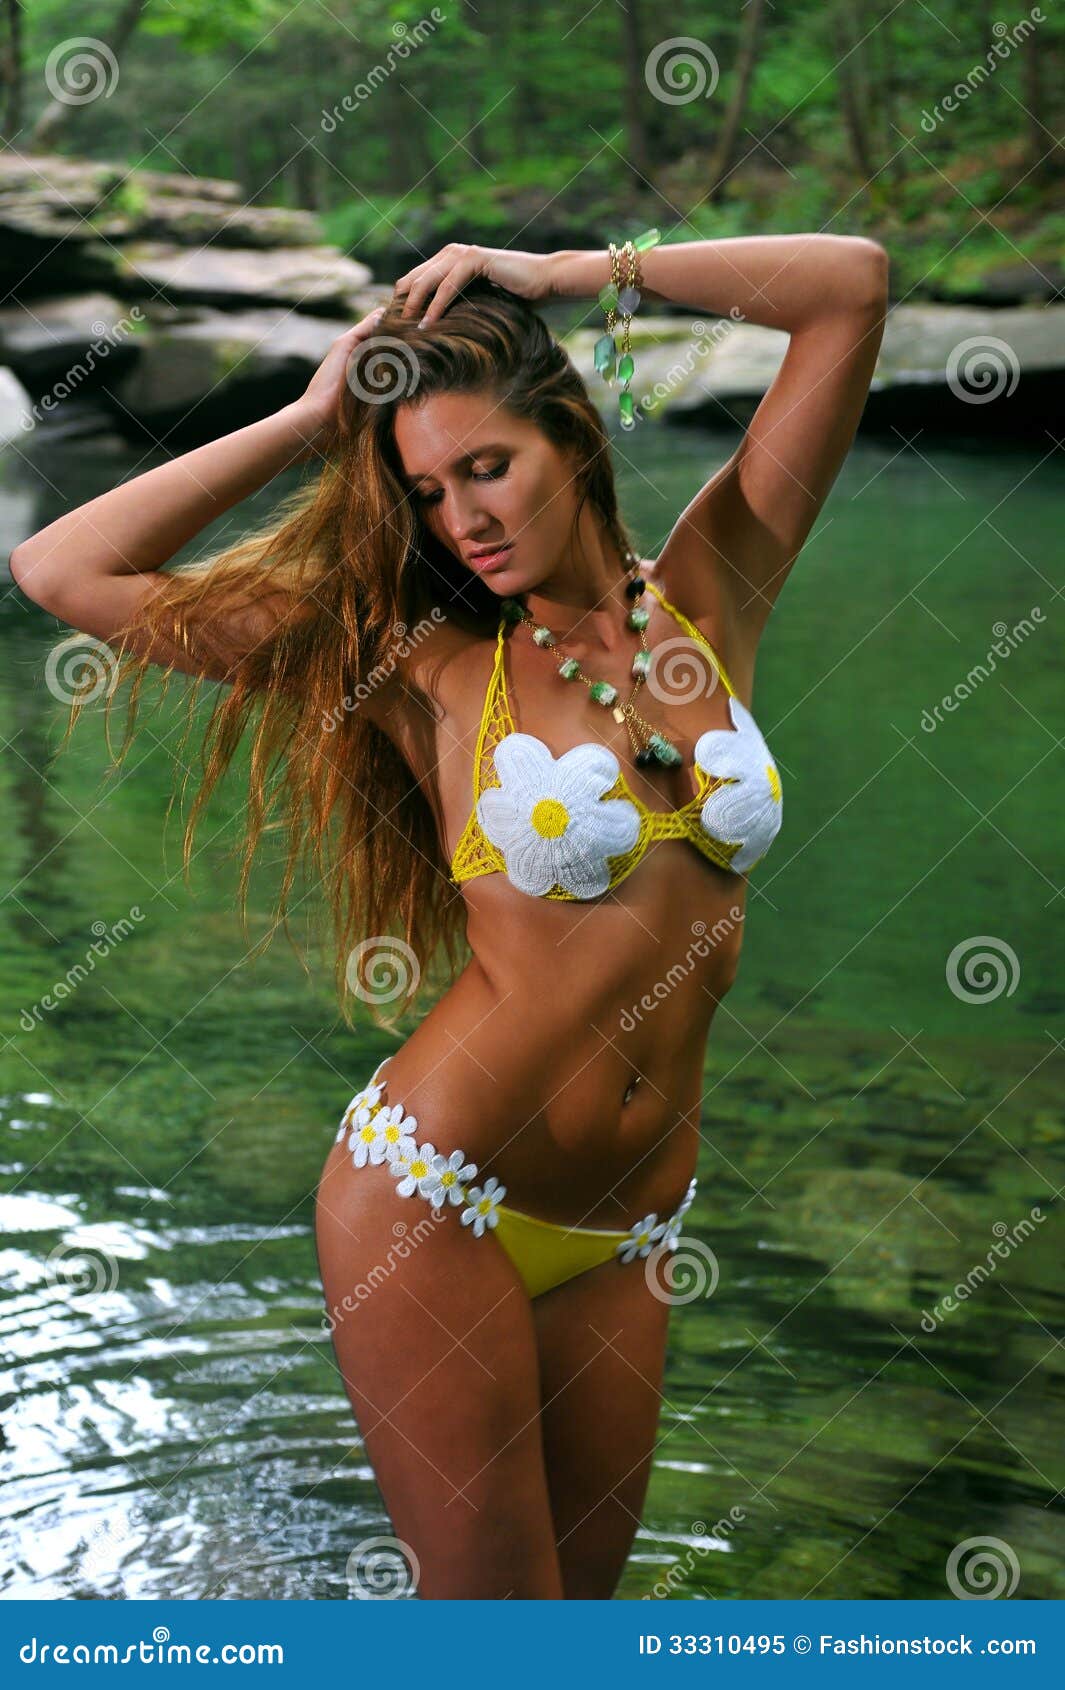 Young Woman Posing in Designer Bikini at Exotic Location of Mountain River Stock Image